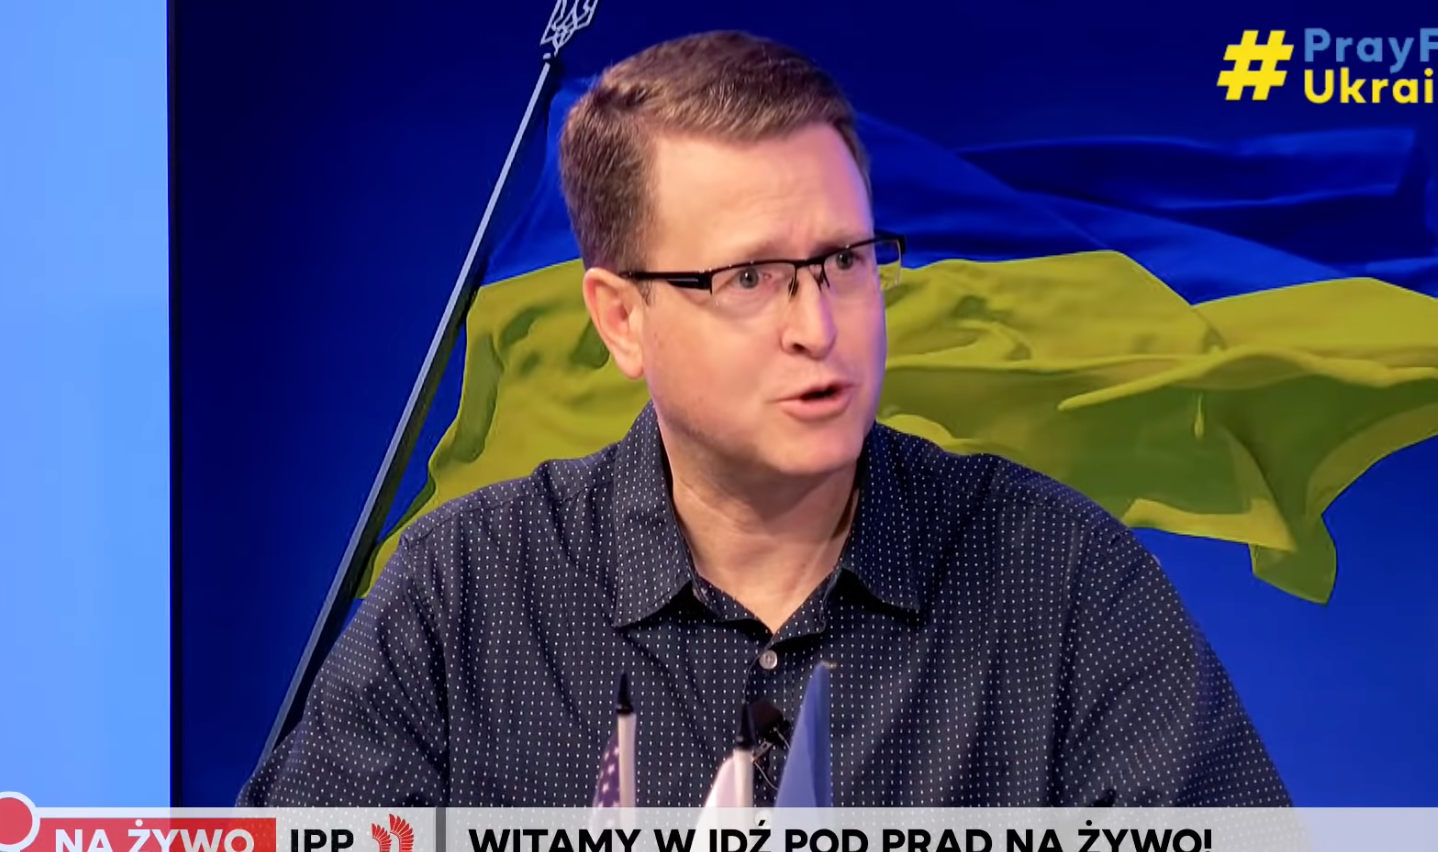 Former Washington state Rep Matt Shea appearing on Polish TV to explain his attempt to bring 63 Ukrainian orphans to the US